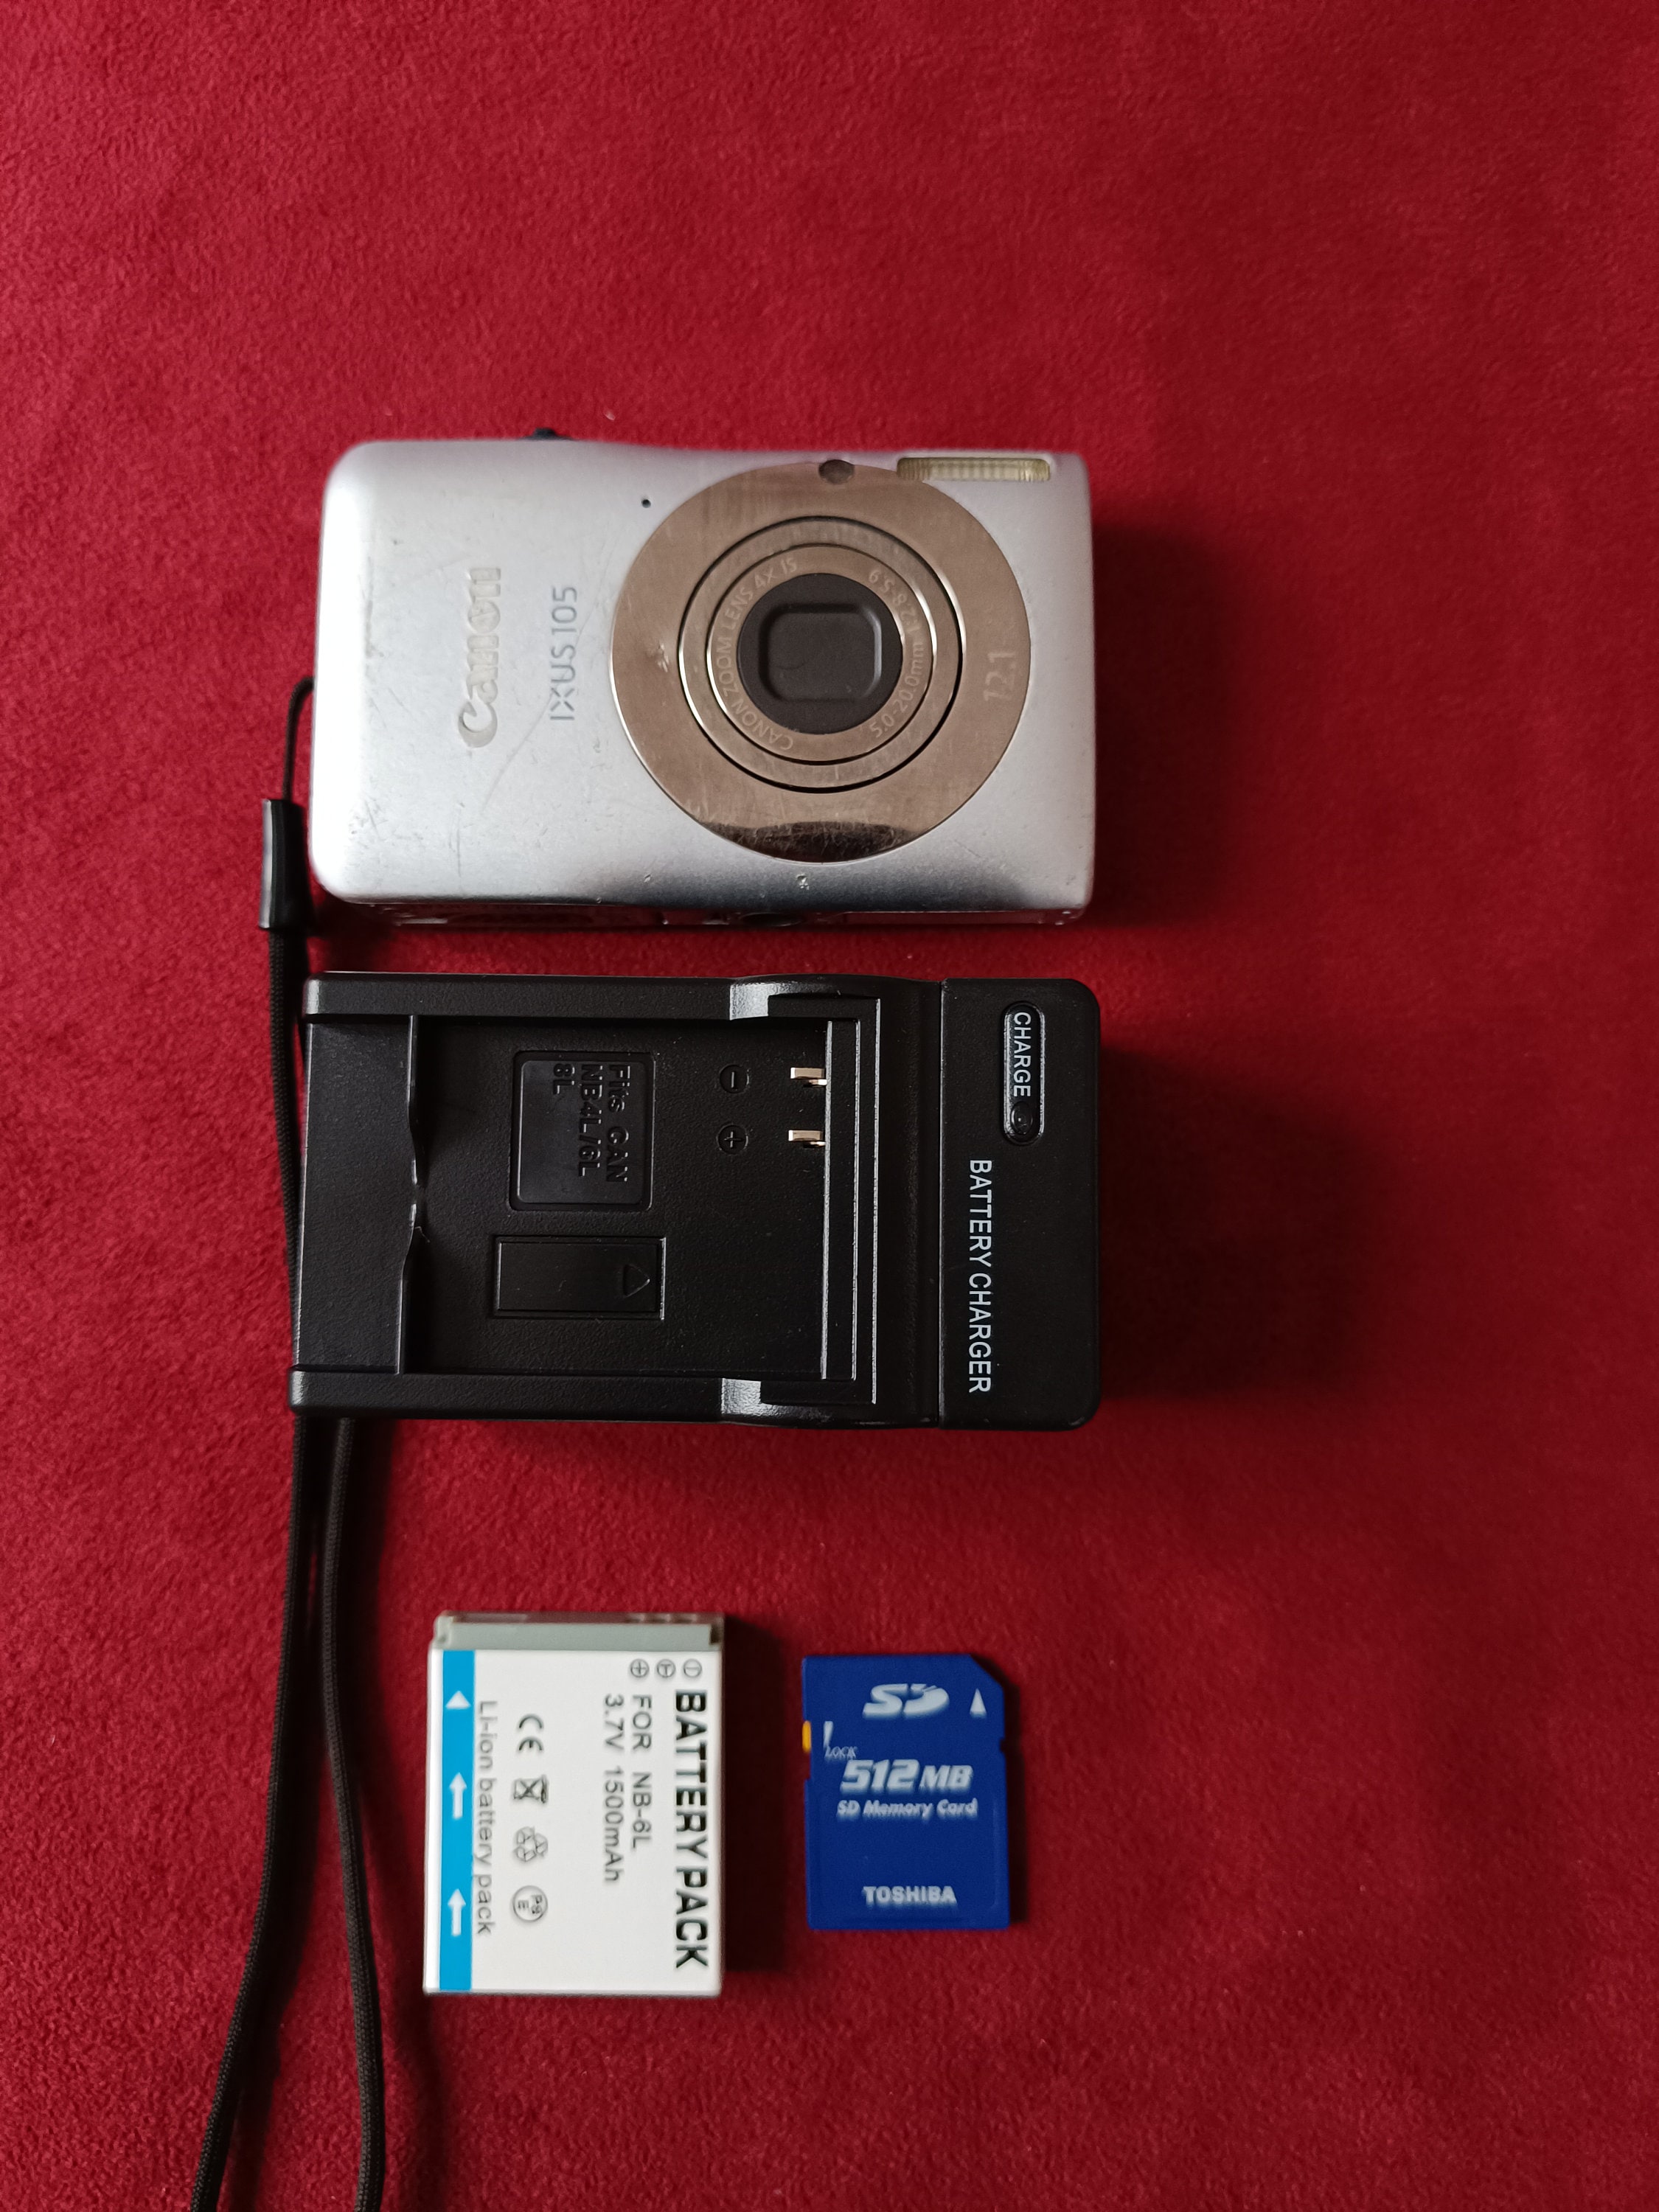 Canon IXUS 275 HS -Specification - PowerShot and IXUS digital compact  cameras - Canon Central and North Africa